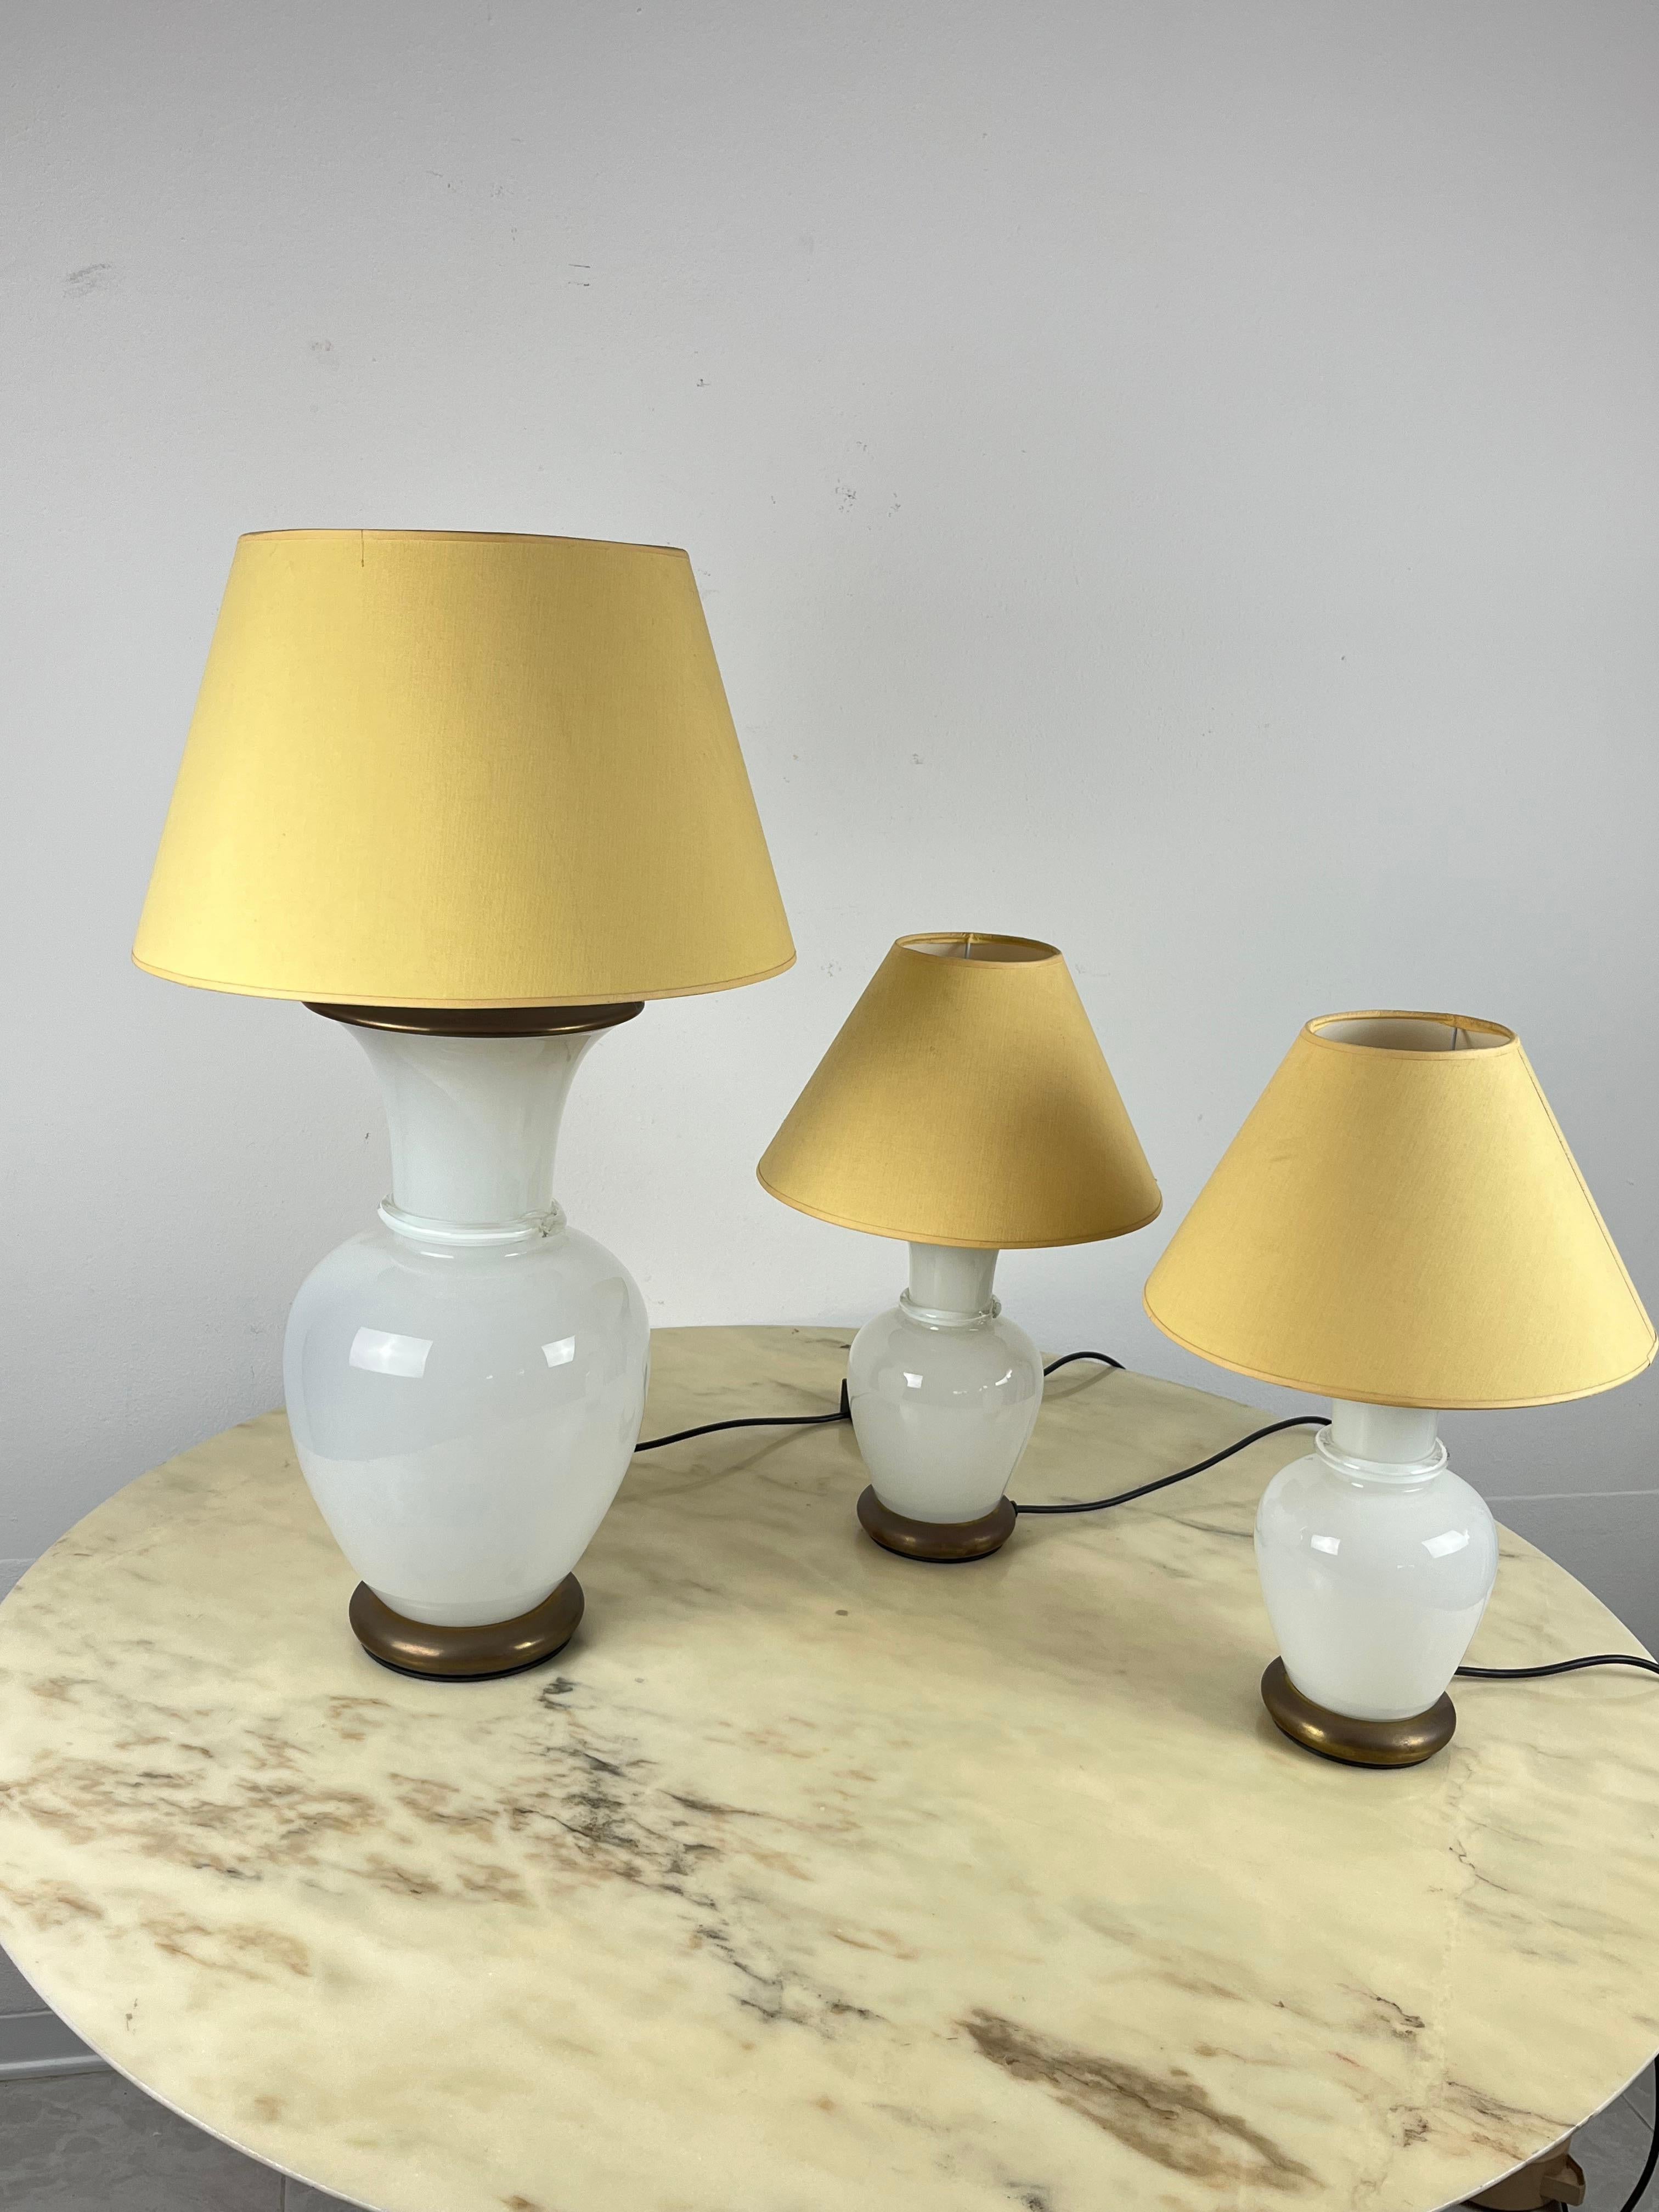 Italian Set of 3 Murano Glass and Brass Table Lamps, F. Fabbian, Italy, 1970s For Sale